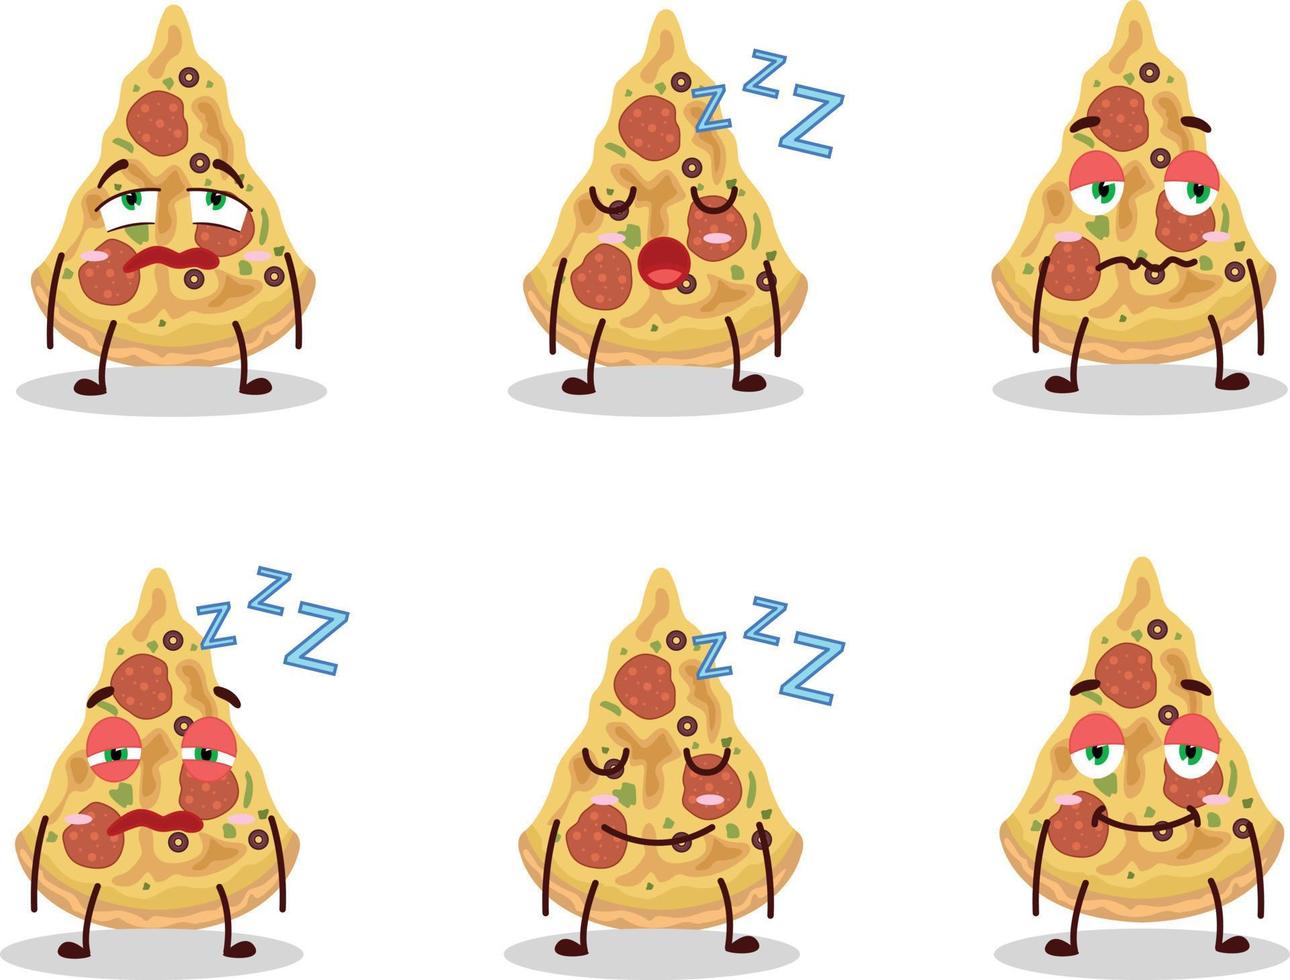 Cartoon character of slice of pizza with sleepy expression vector